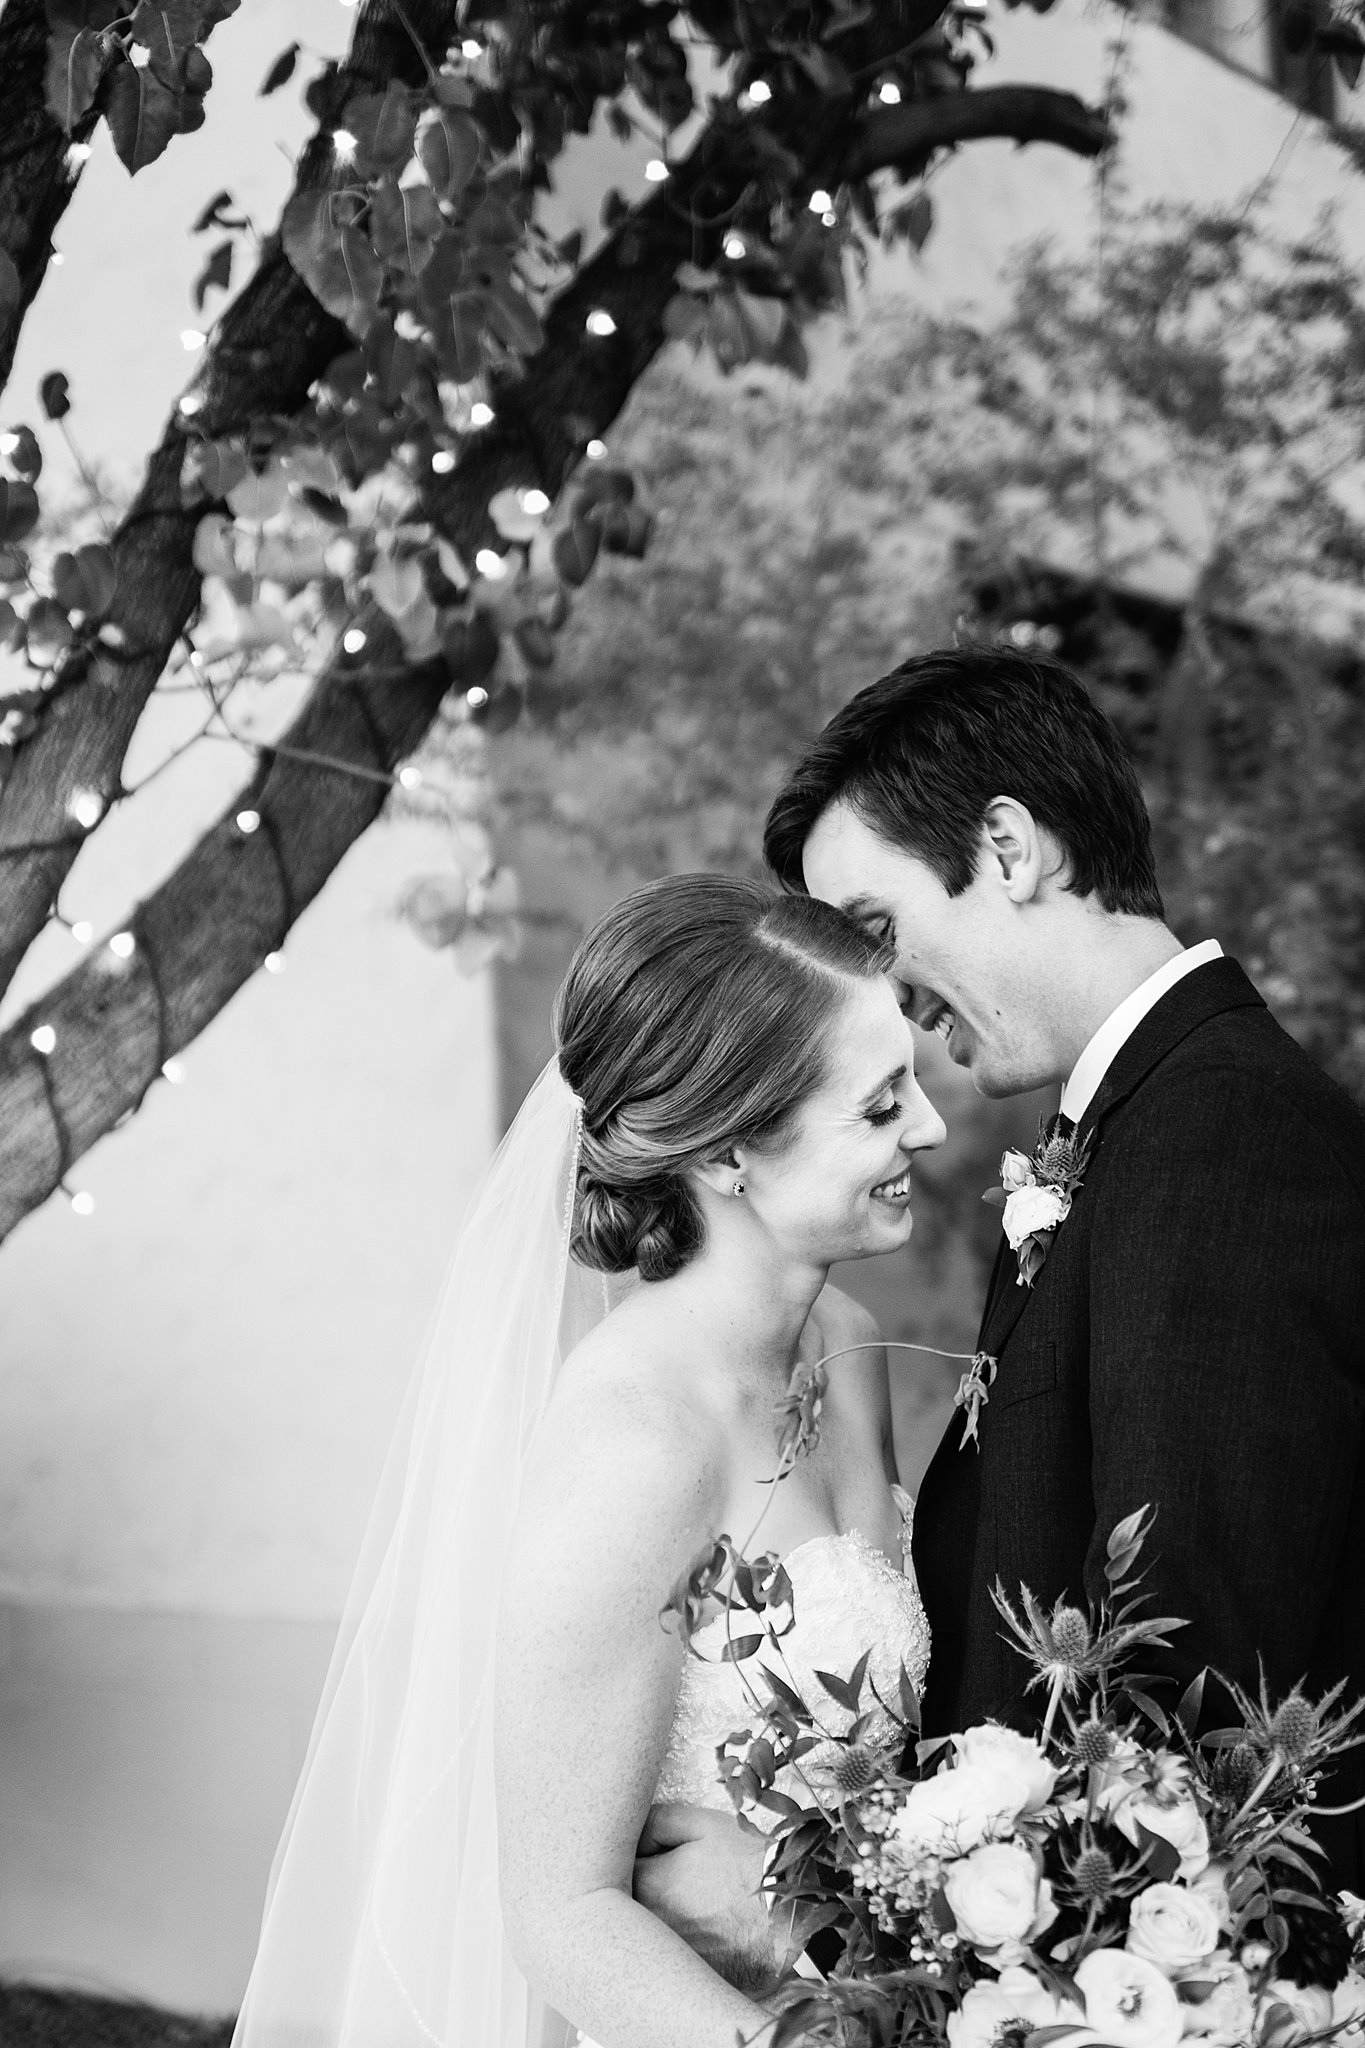 Bride and Groom share an intimate moment during their Secret Garden Events wedding by Phoenix wedding photographer PMA Photography.